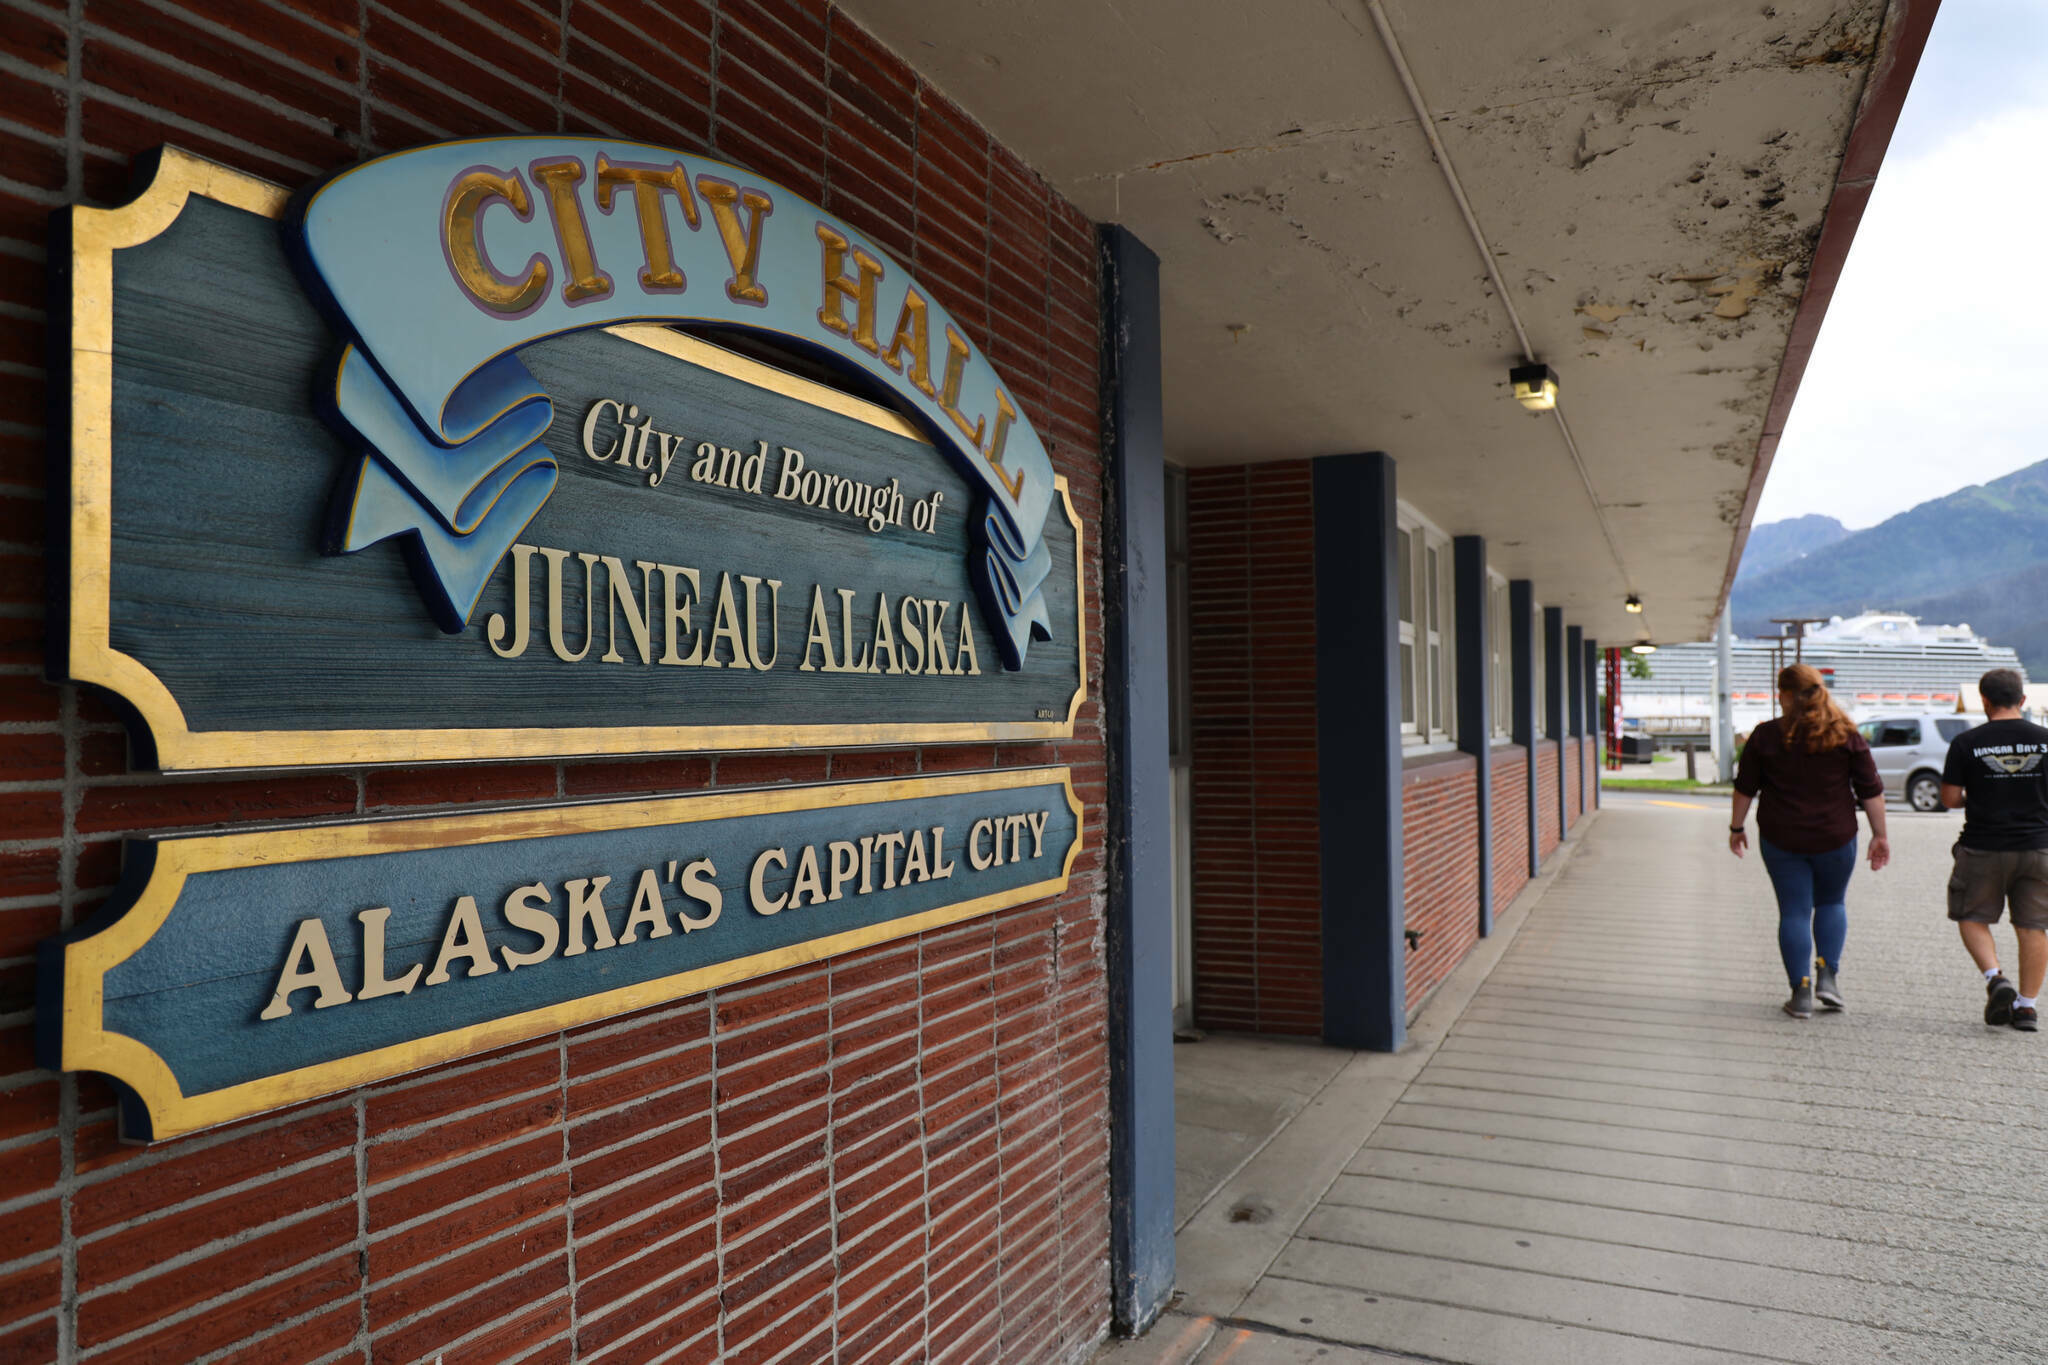 Clarise Larson / Juneau Empire File
Voters in the City and Borough of Juneau municipal election will decide this fall whether to approve $27 million in bond debt to fund the majority of the construction cost for a new City Hall. A similar $35 million measure was rejected last year.